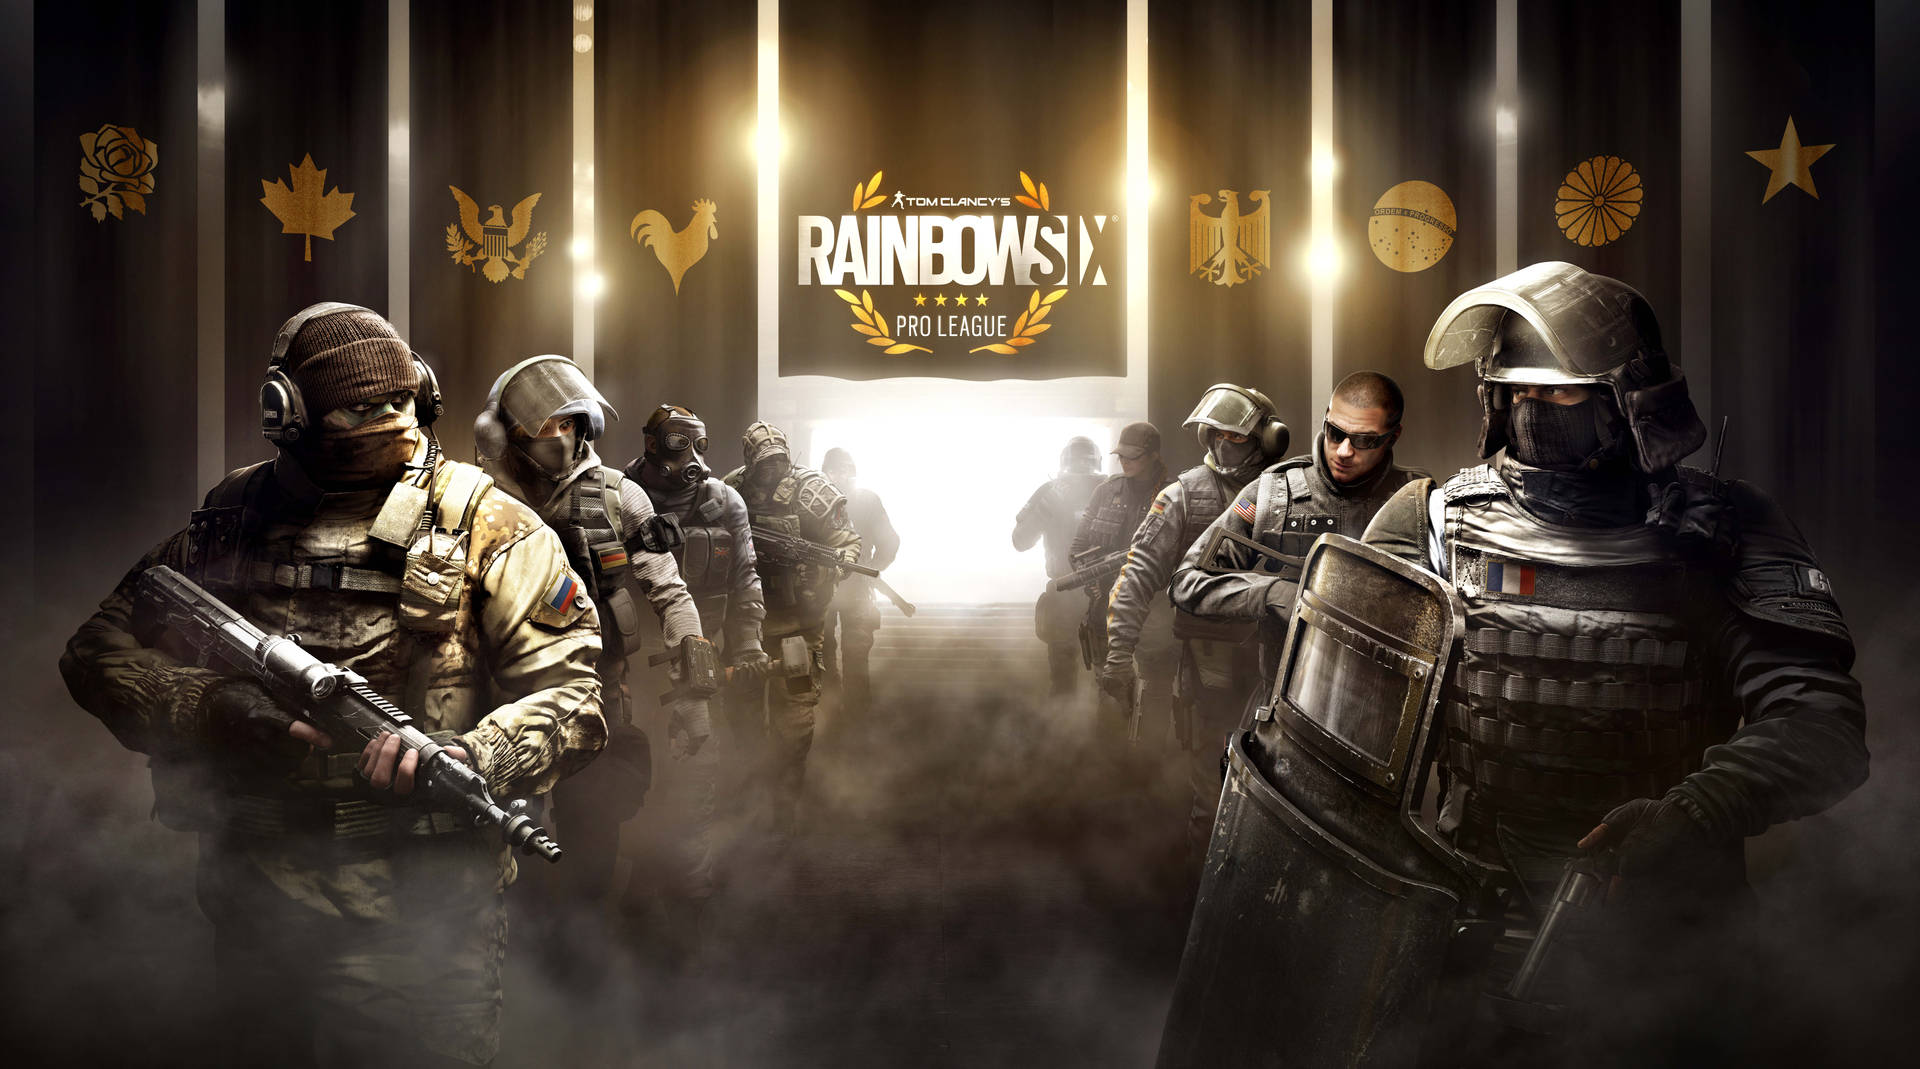 Dominate the battlefield with Rainbow Six Siege: The Pro League Wallpaper